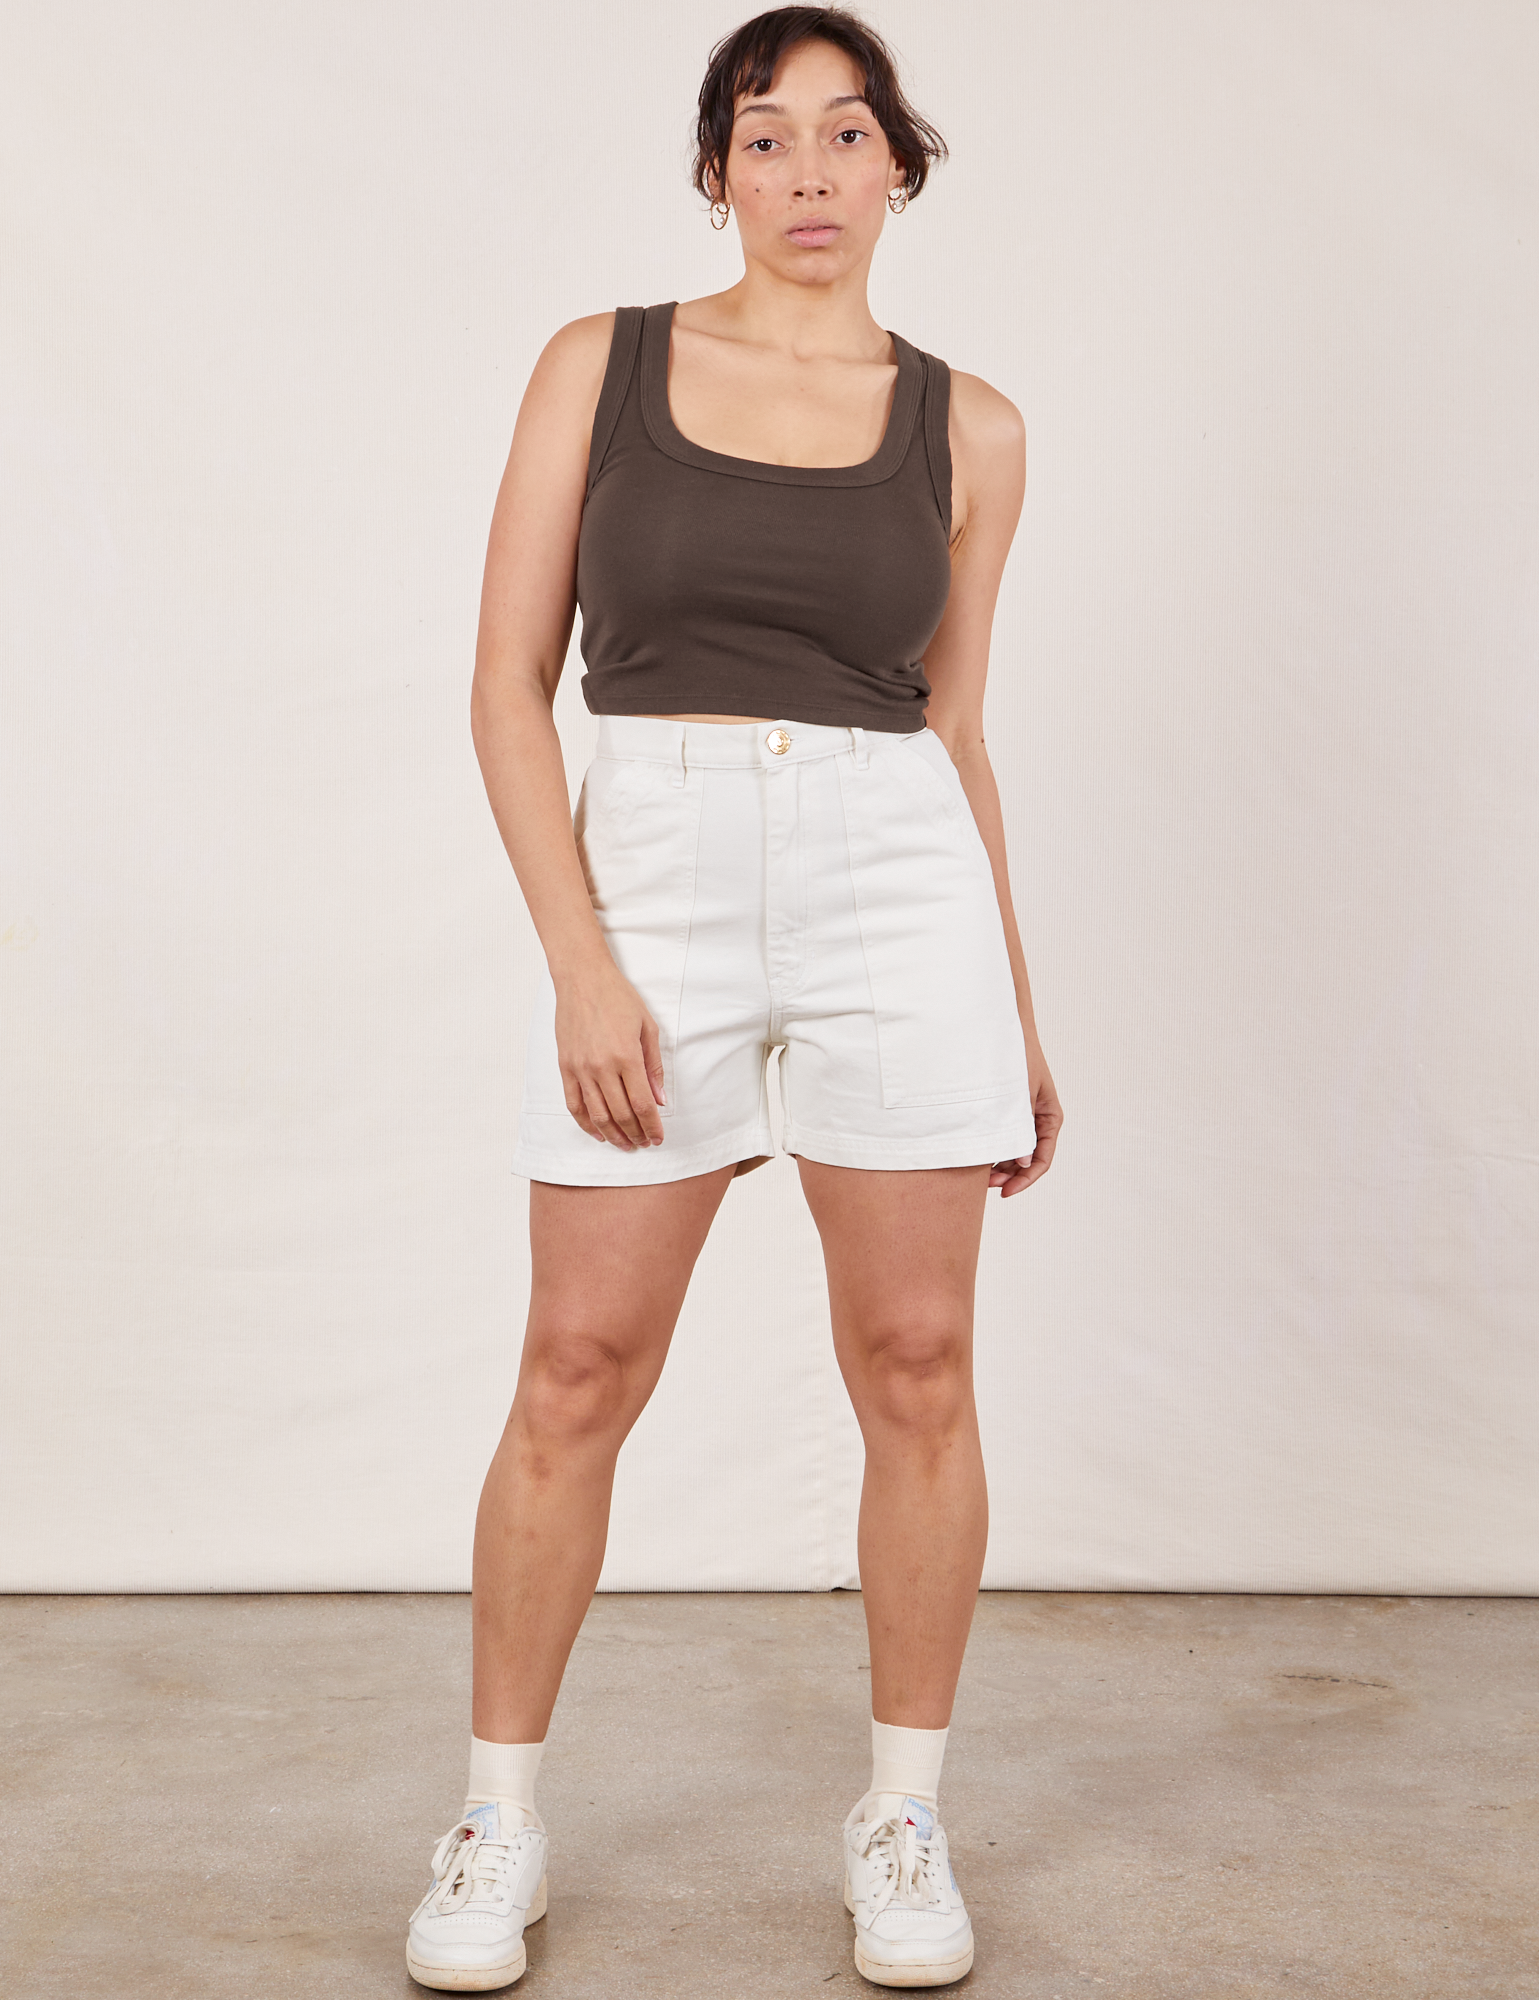 Tiara is 5’4” and wearing S Classic Work Shorts in Vintage Tee Off-White paired with espresso brown Cropped Tank Top